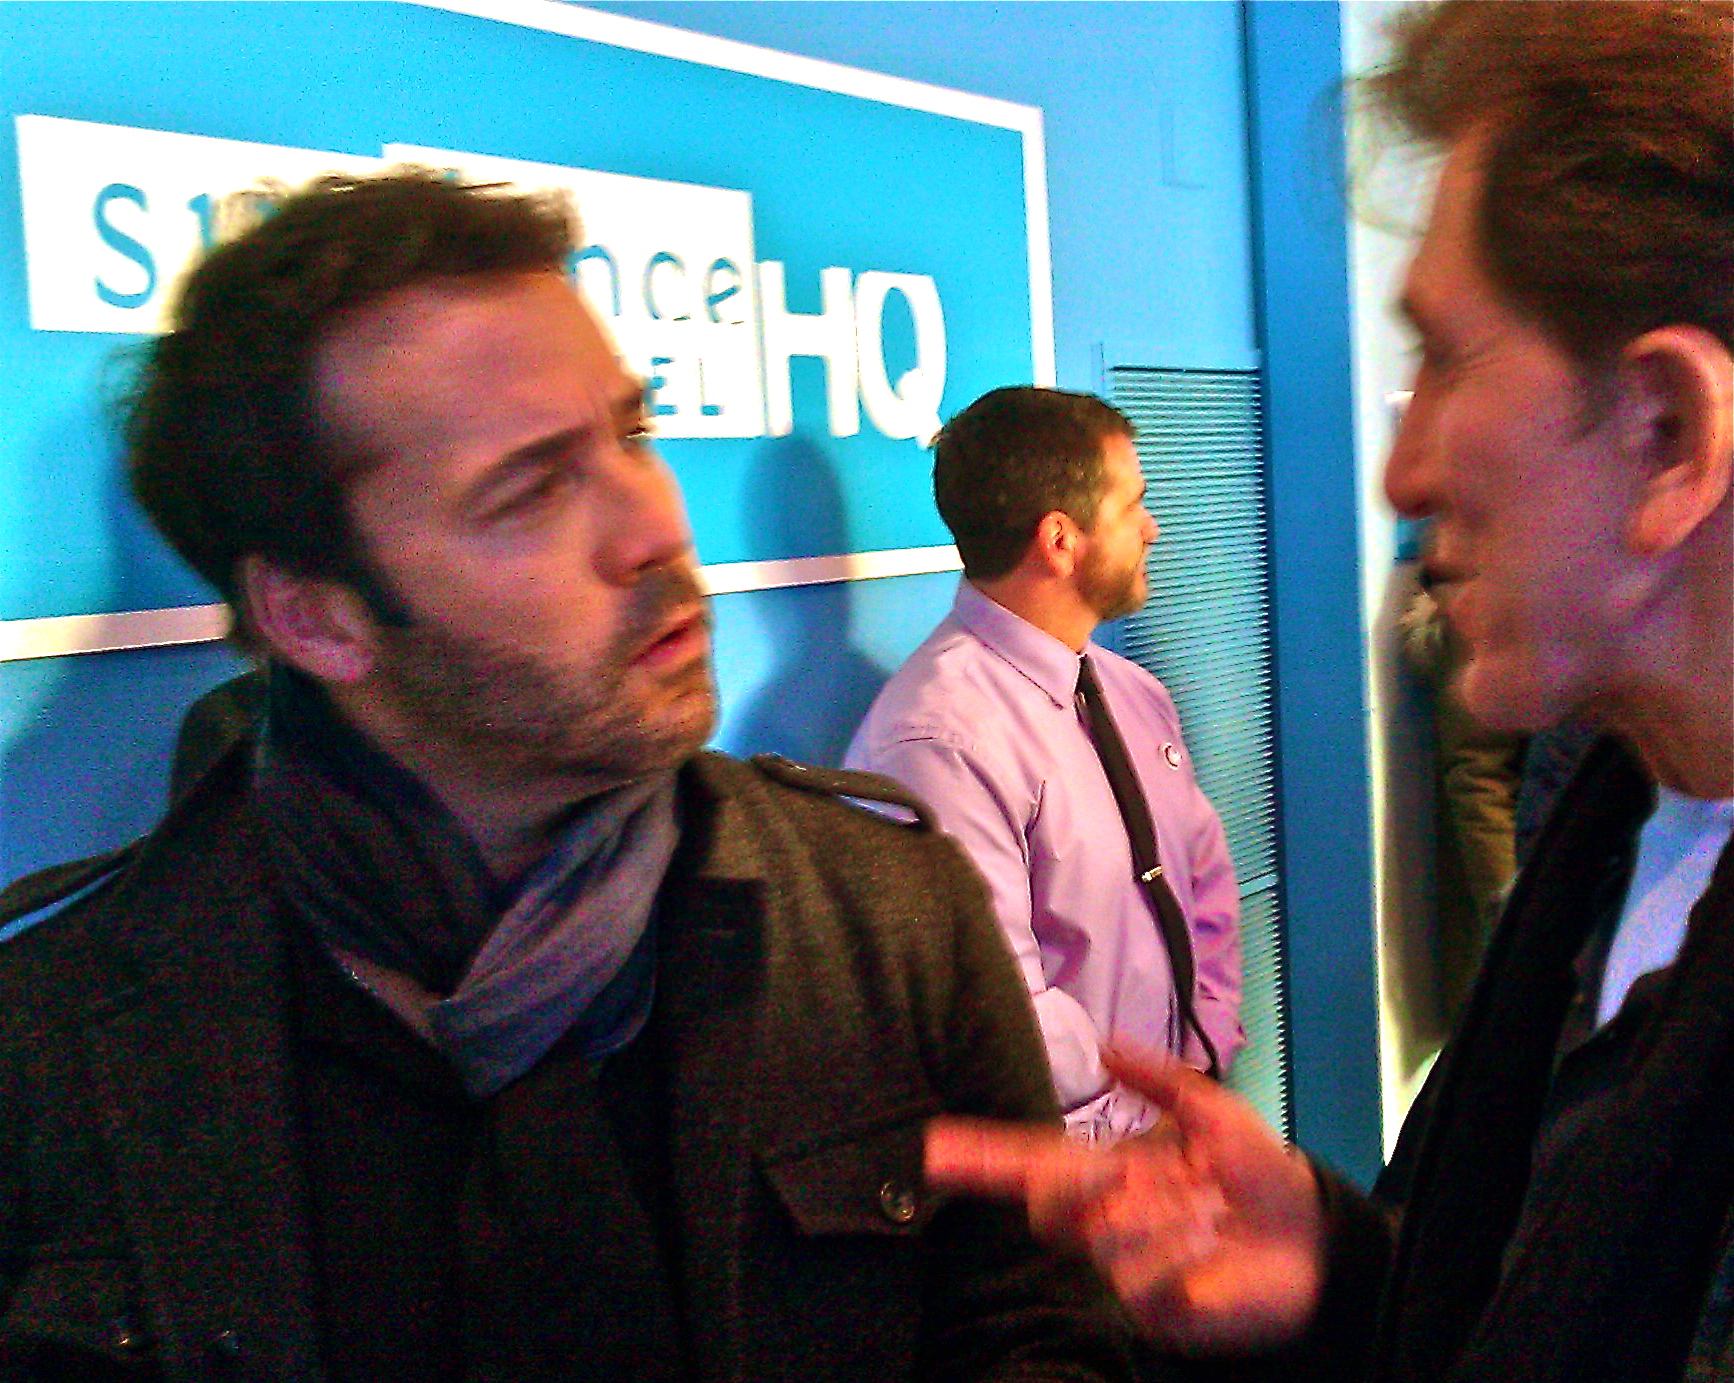 Jeremy Piven (Entourage) and J.J. Alani at Sundance Film Festival, 2011. Jeremy was attached to play David & Layla...a week before the shoot his Entourage pilot was picked up. The rest is history!